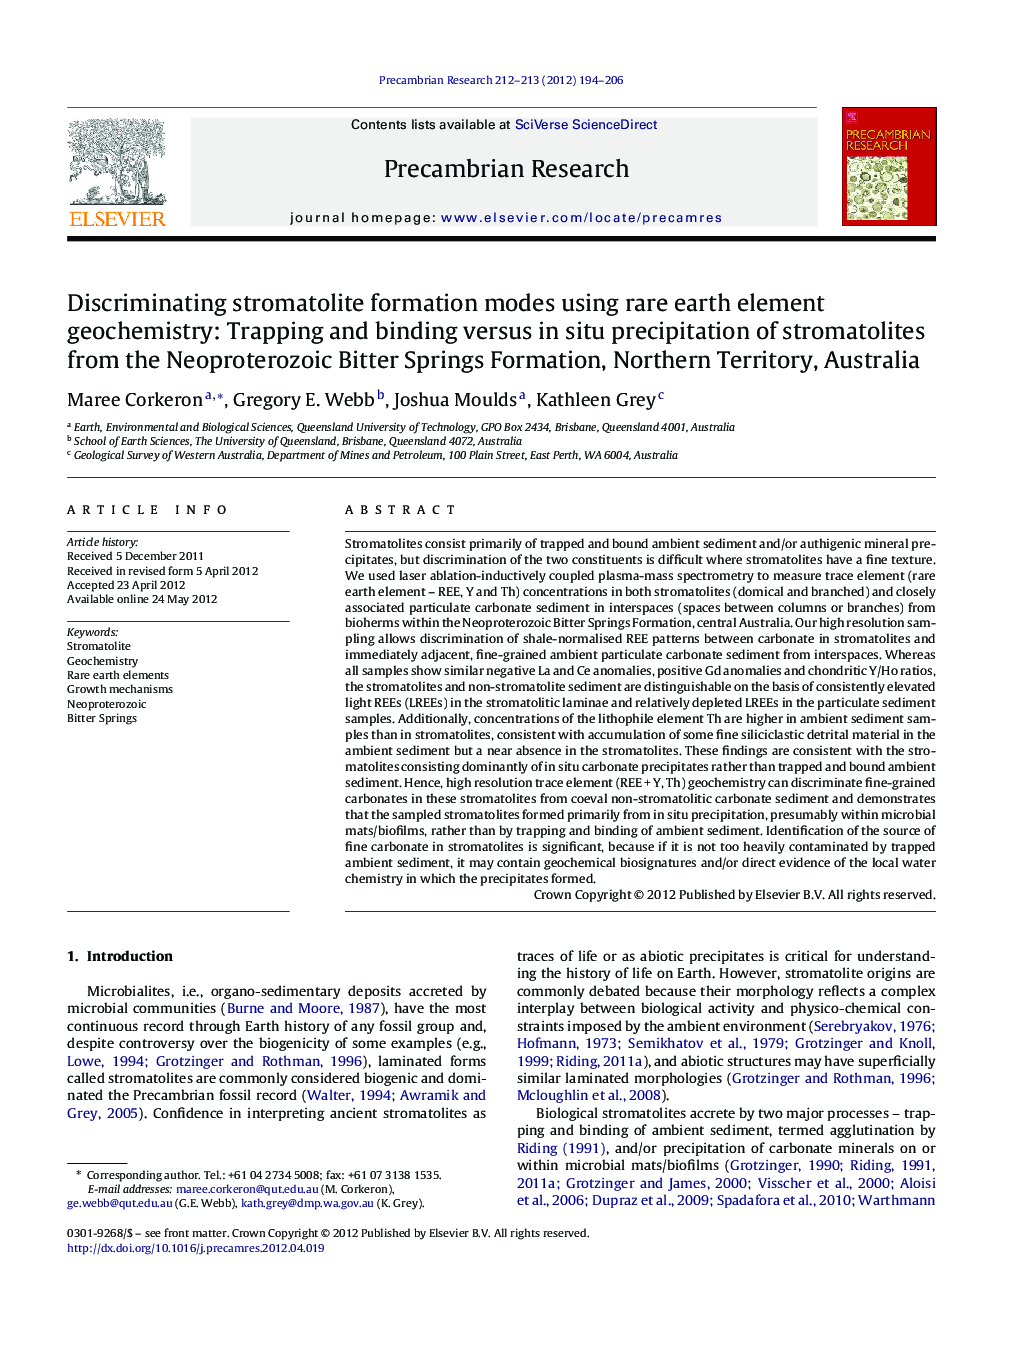 Discriminating stromatolite formation modes using rare earth element geochemistry: Trapping and binding versus in situ precipitation of stromatolites from the Neoproterozoic Bitter Springs Formation, Northern Territory, Australia